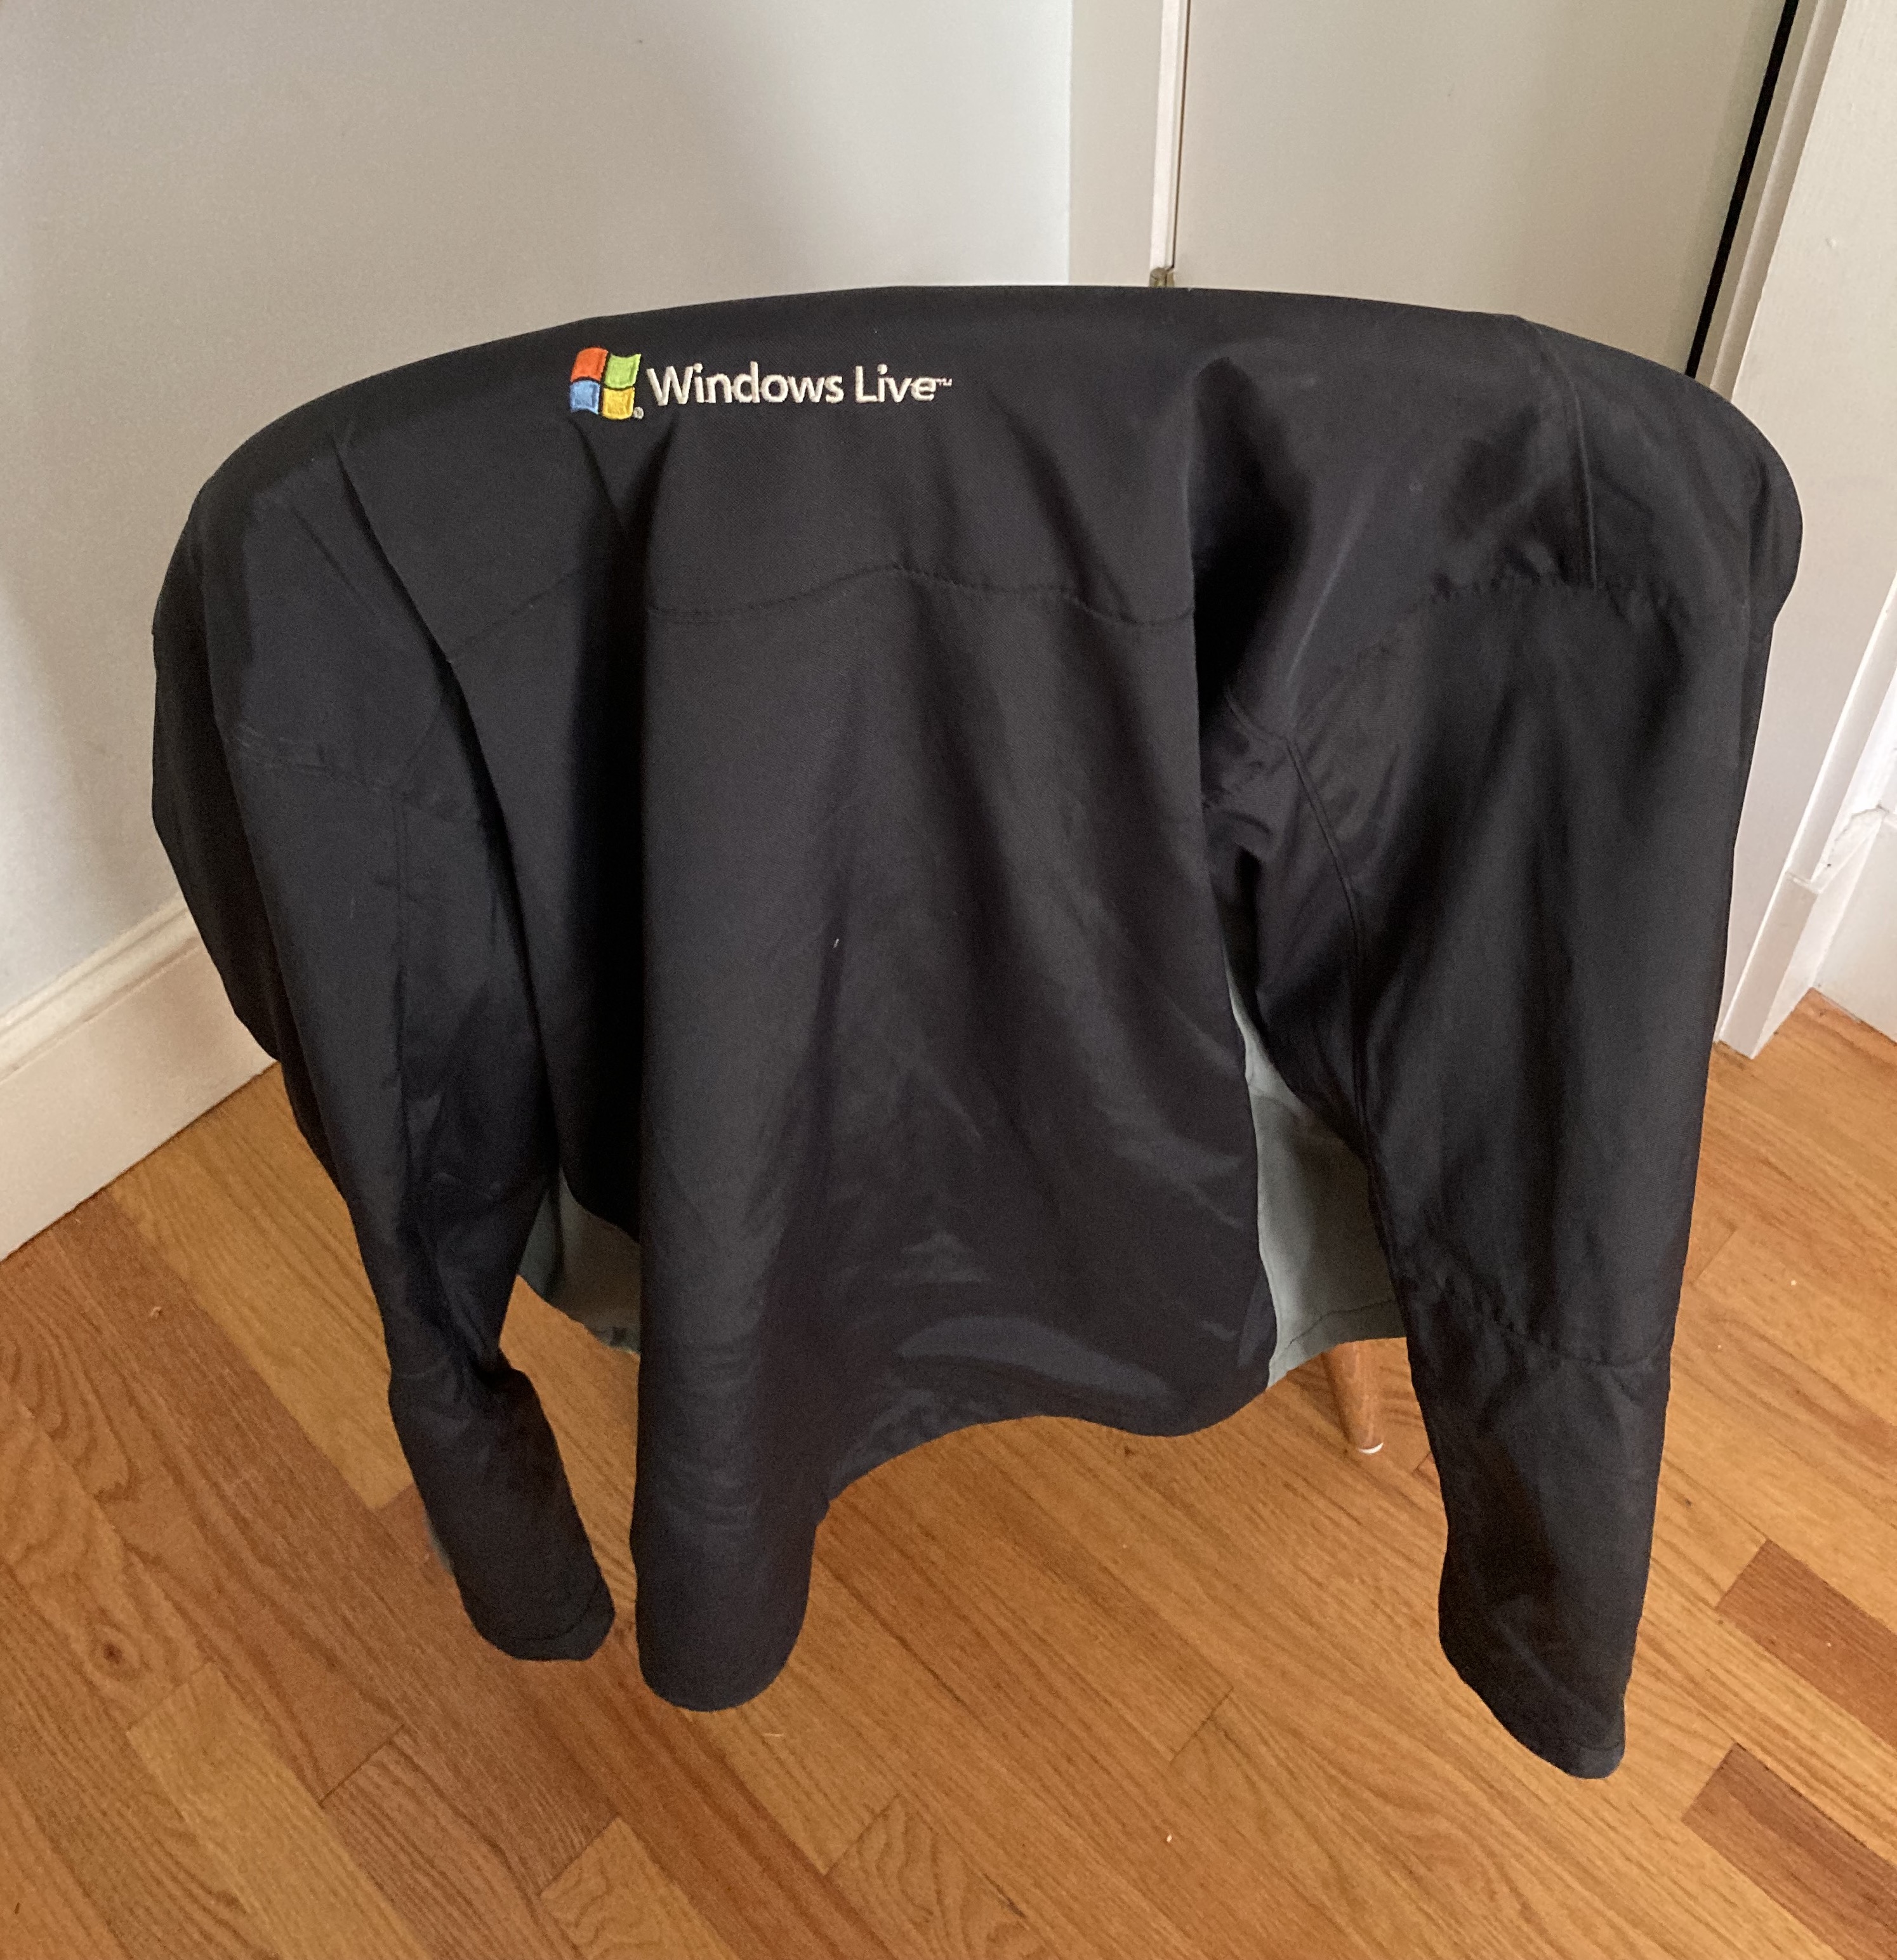 Photo of the jacket I took home from the summit discussing the upcoming release of Windows Live